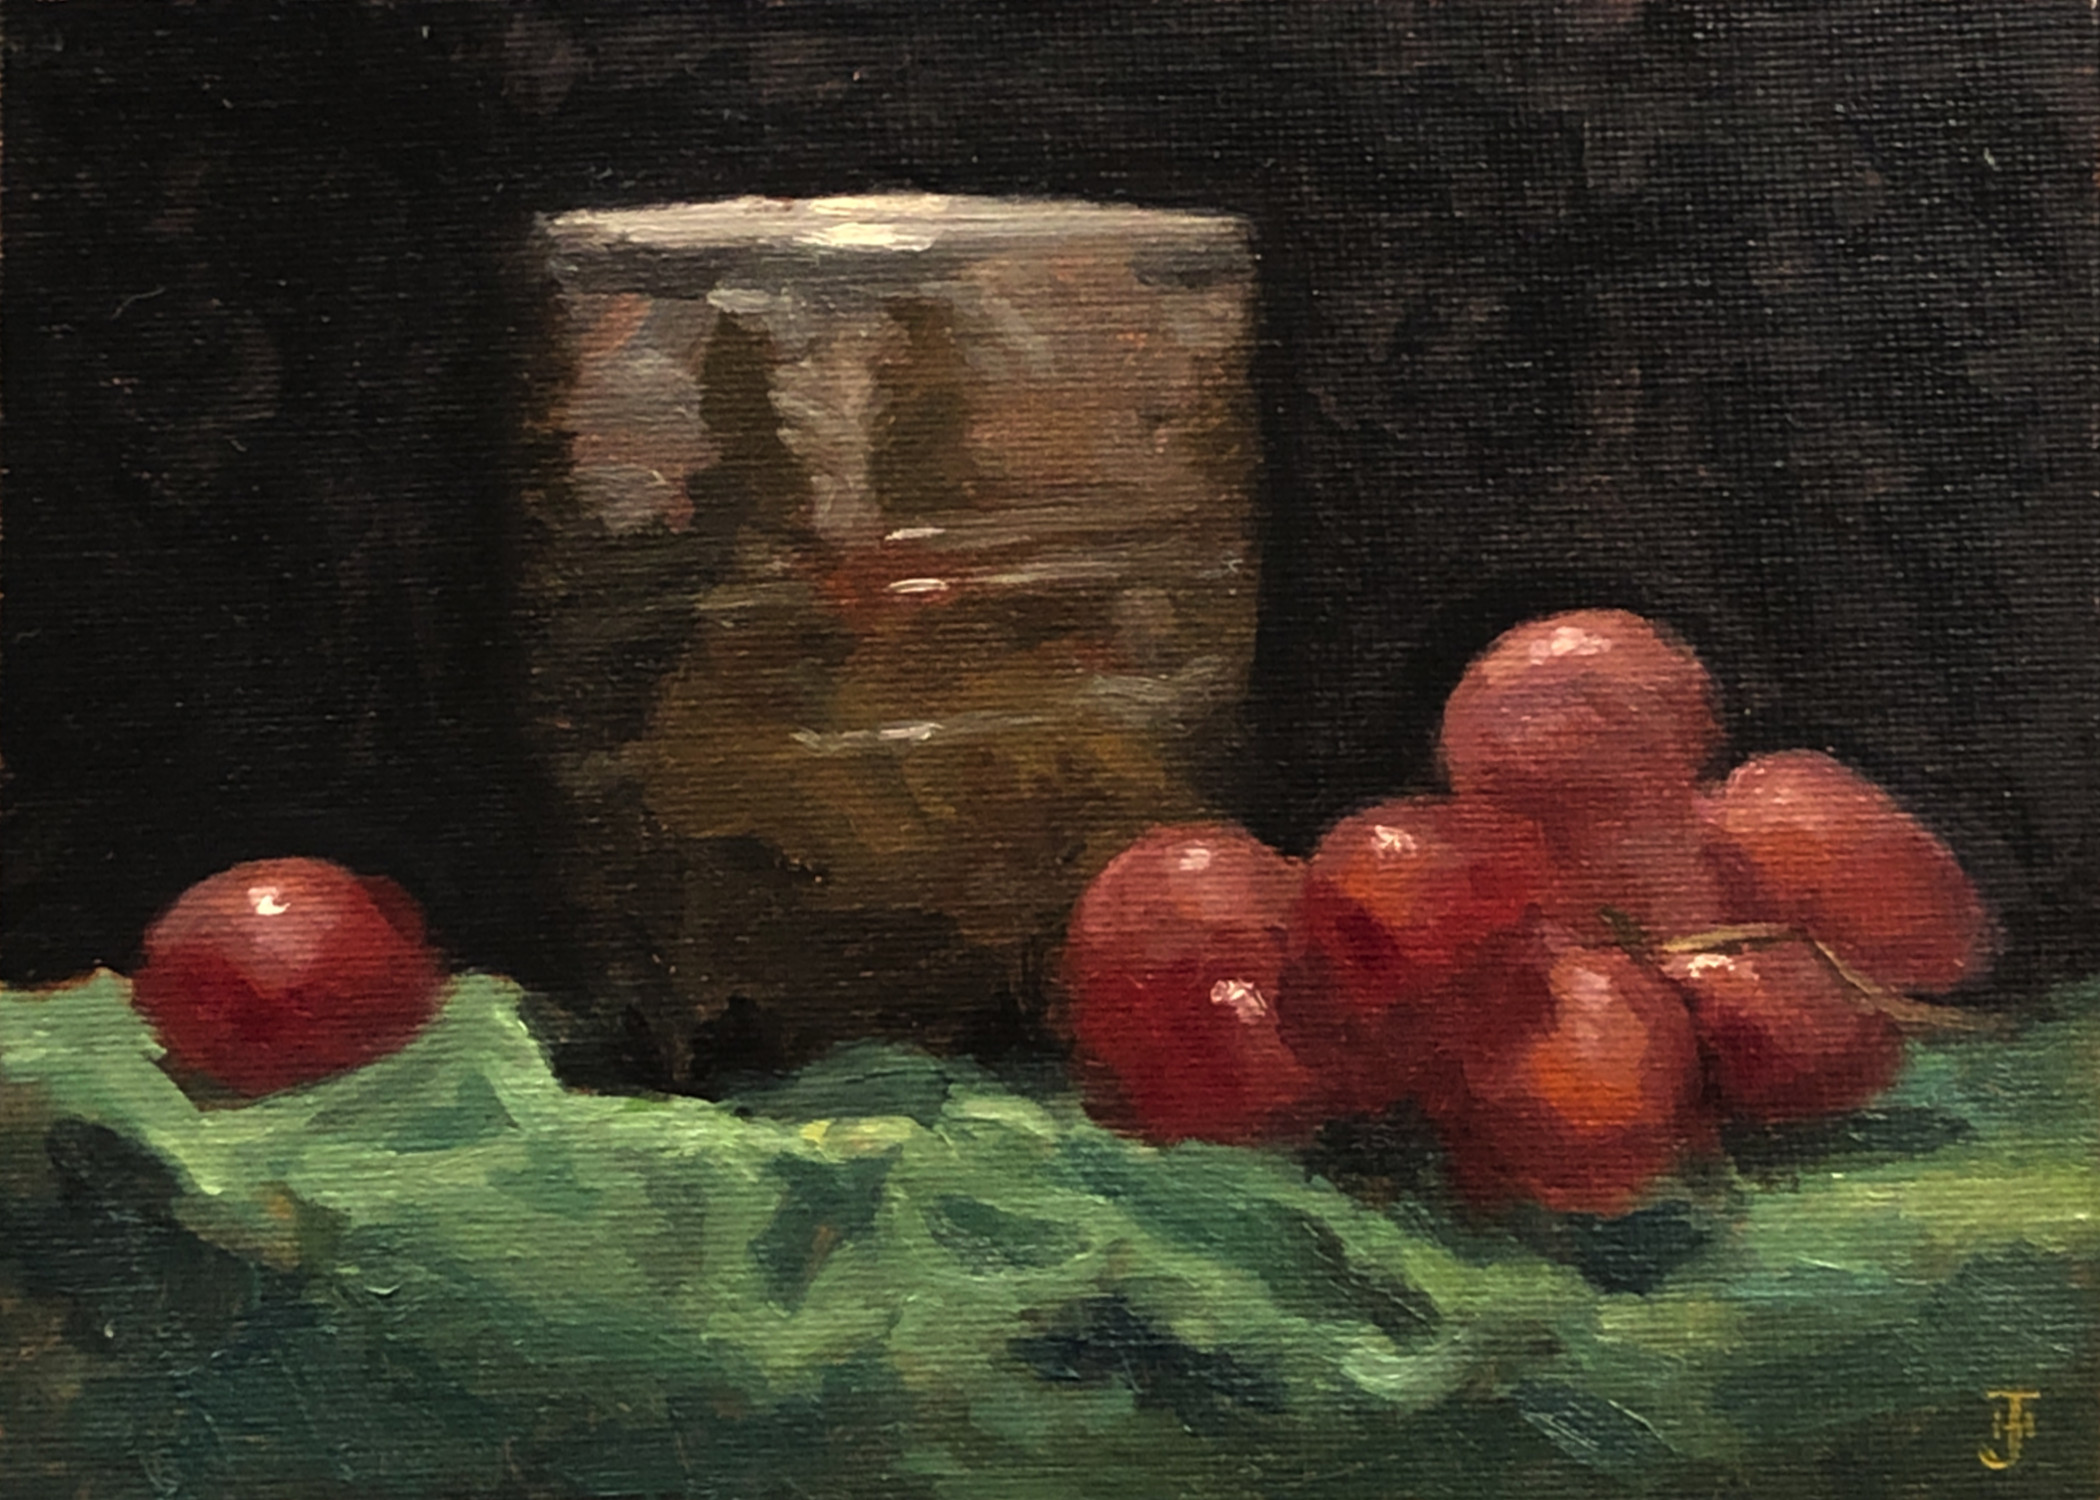 "Handmade Sake Cup and Grapes"
View this painting